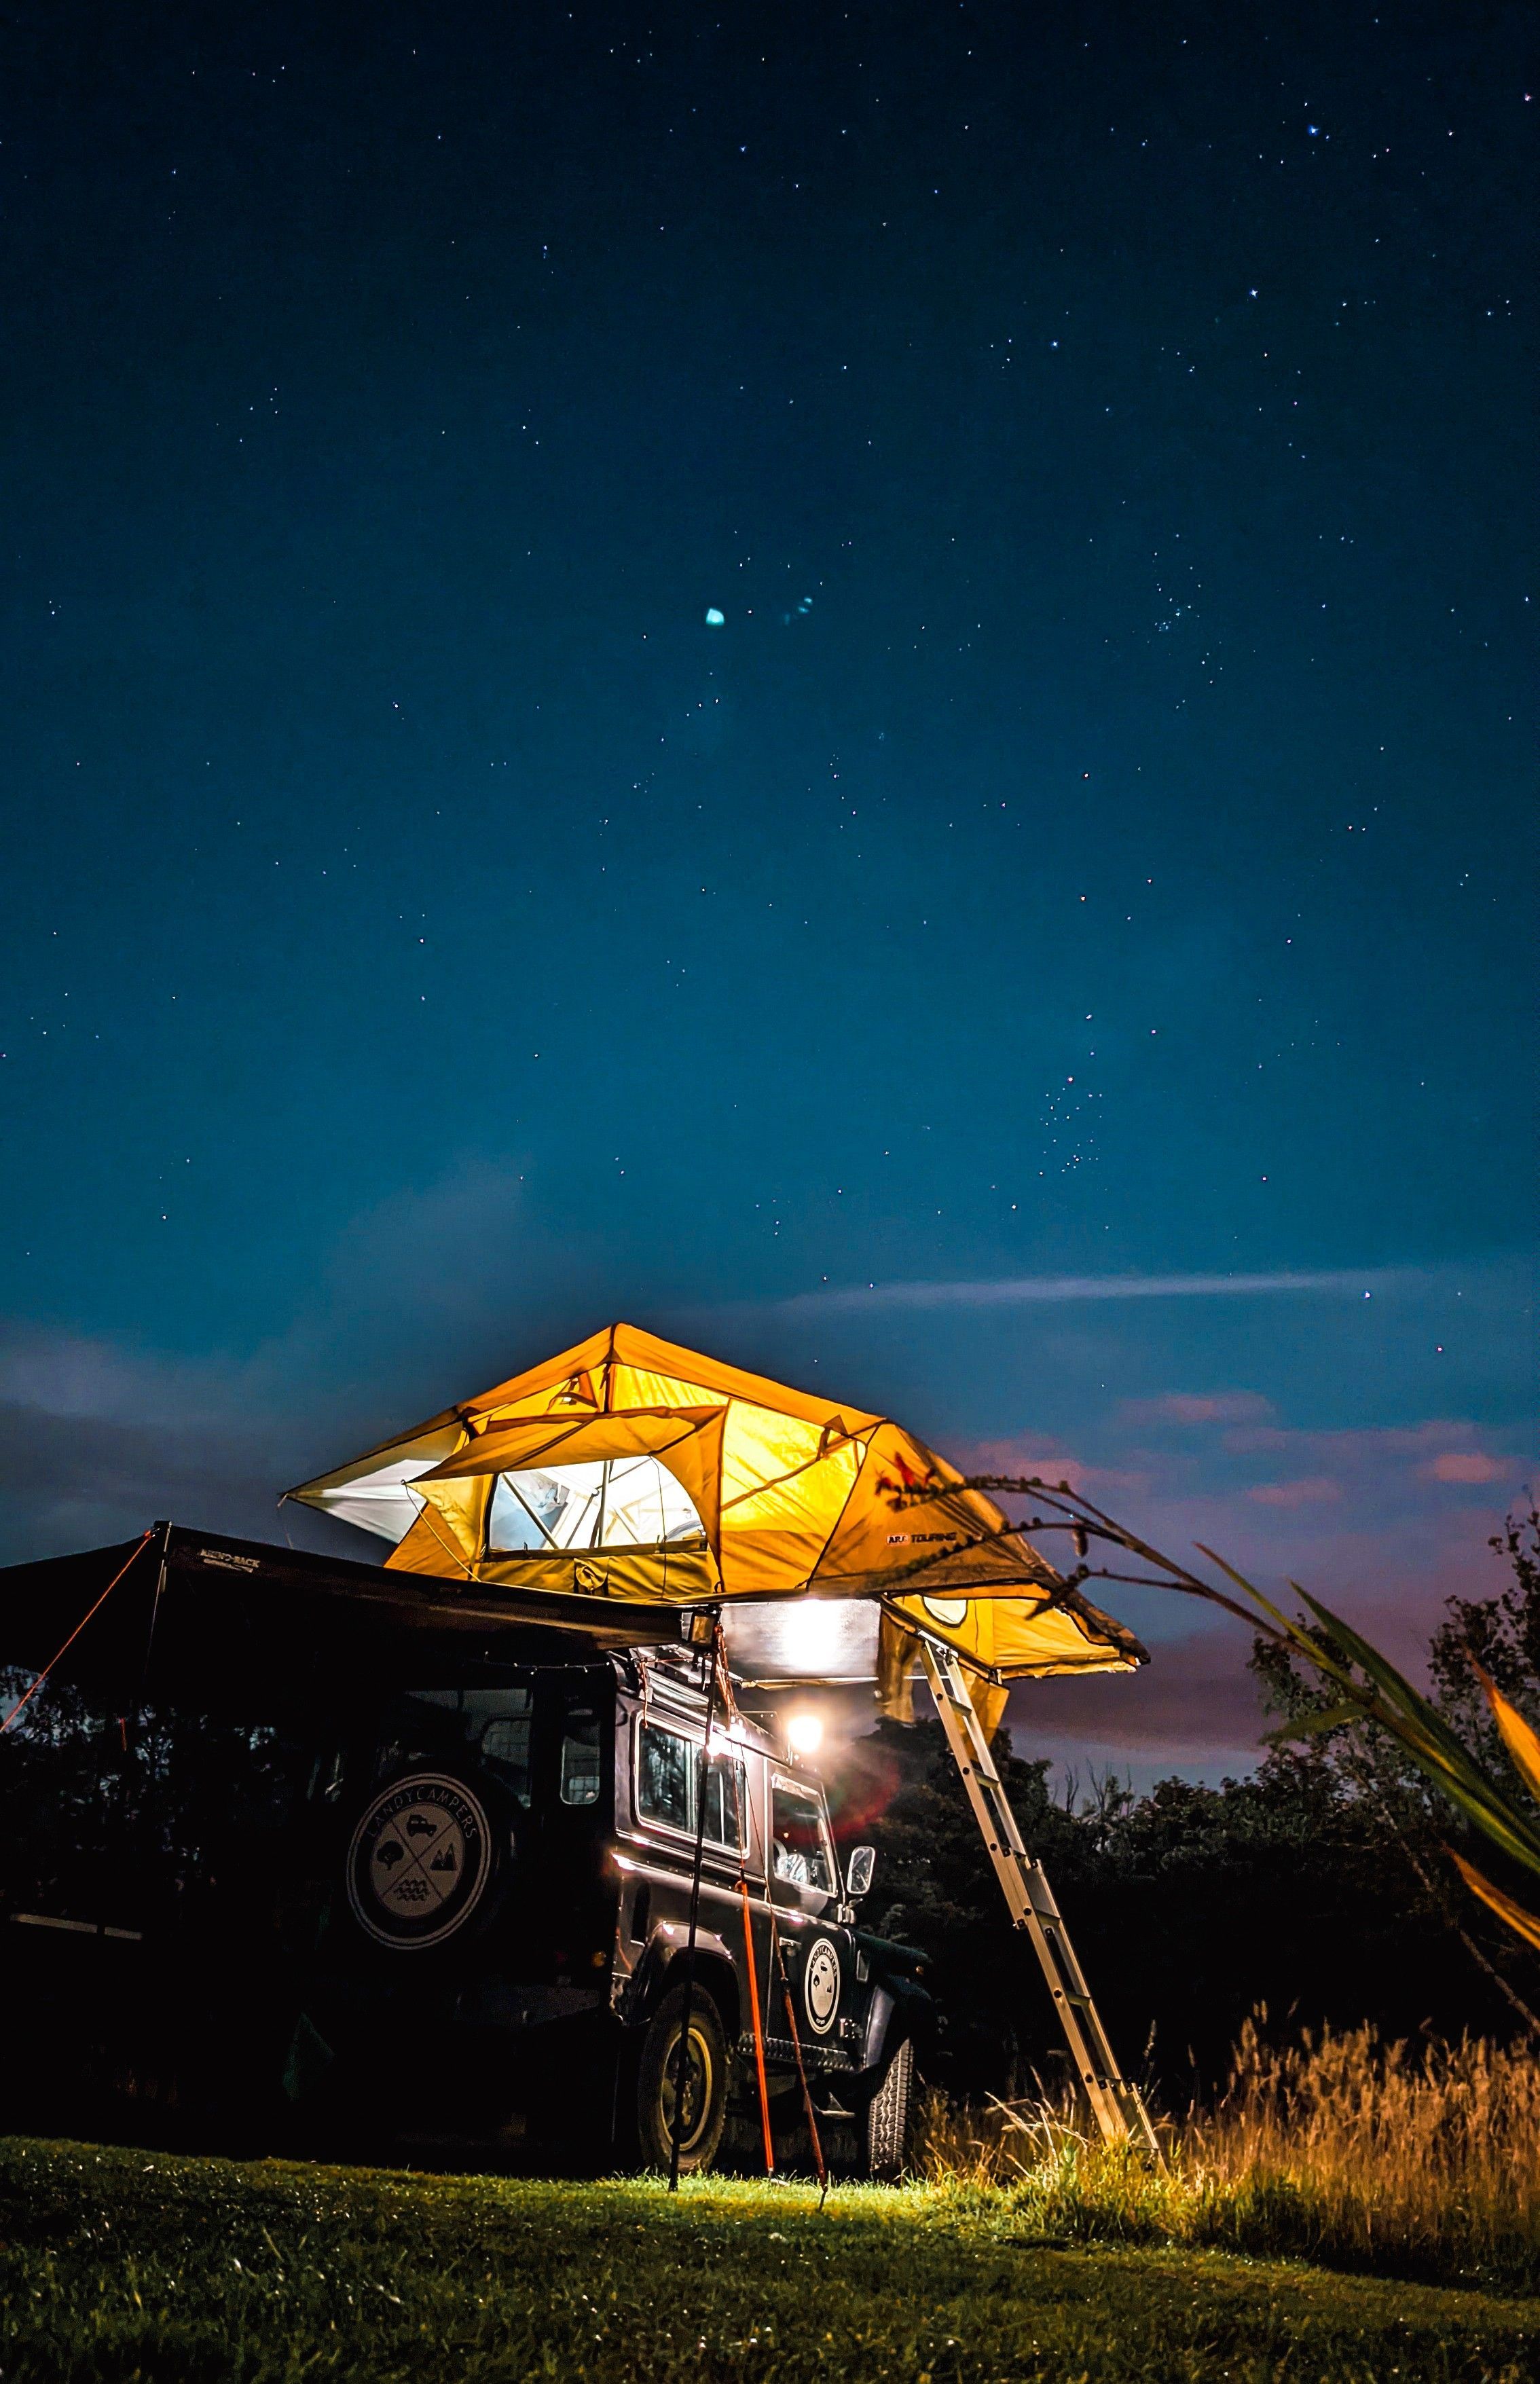 A truck parked underneath an awning with lights on - Camping